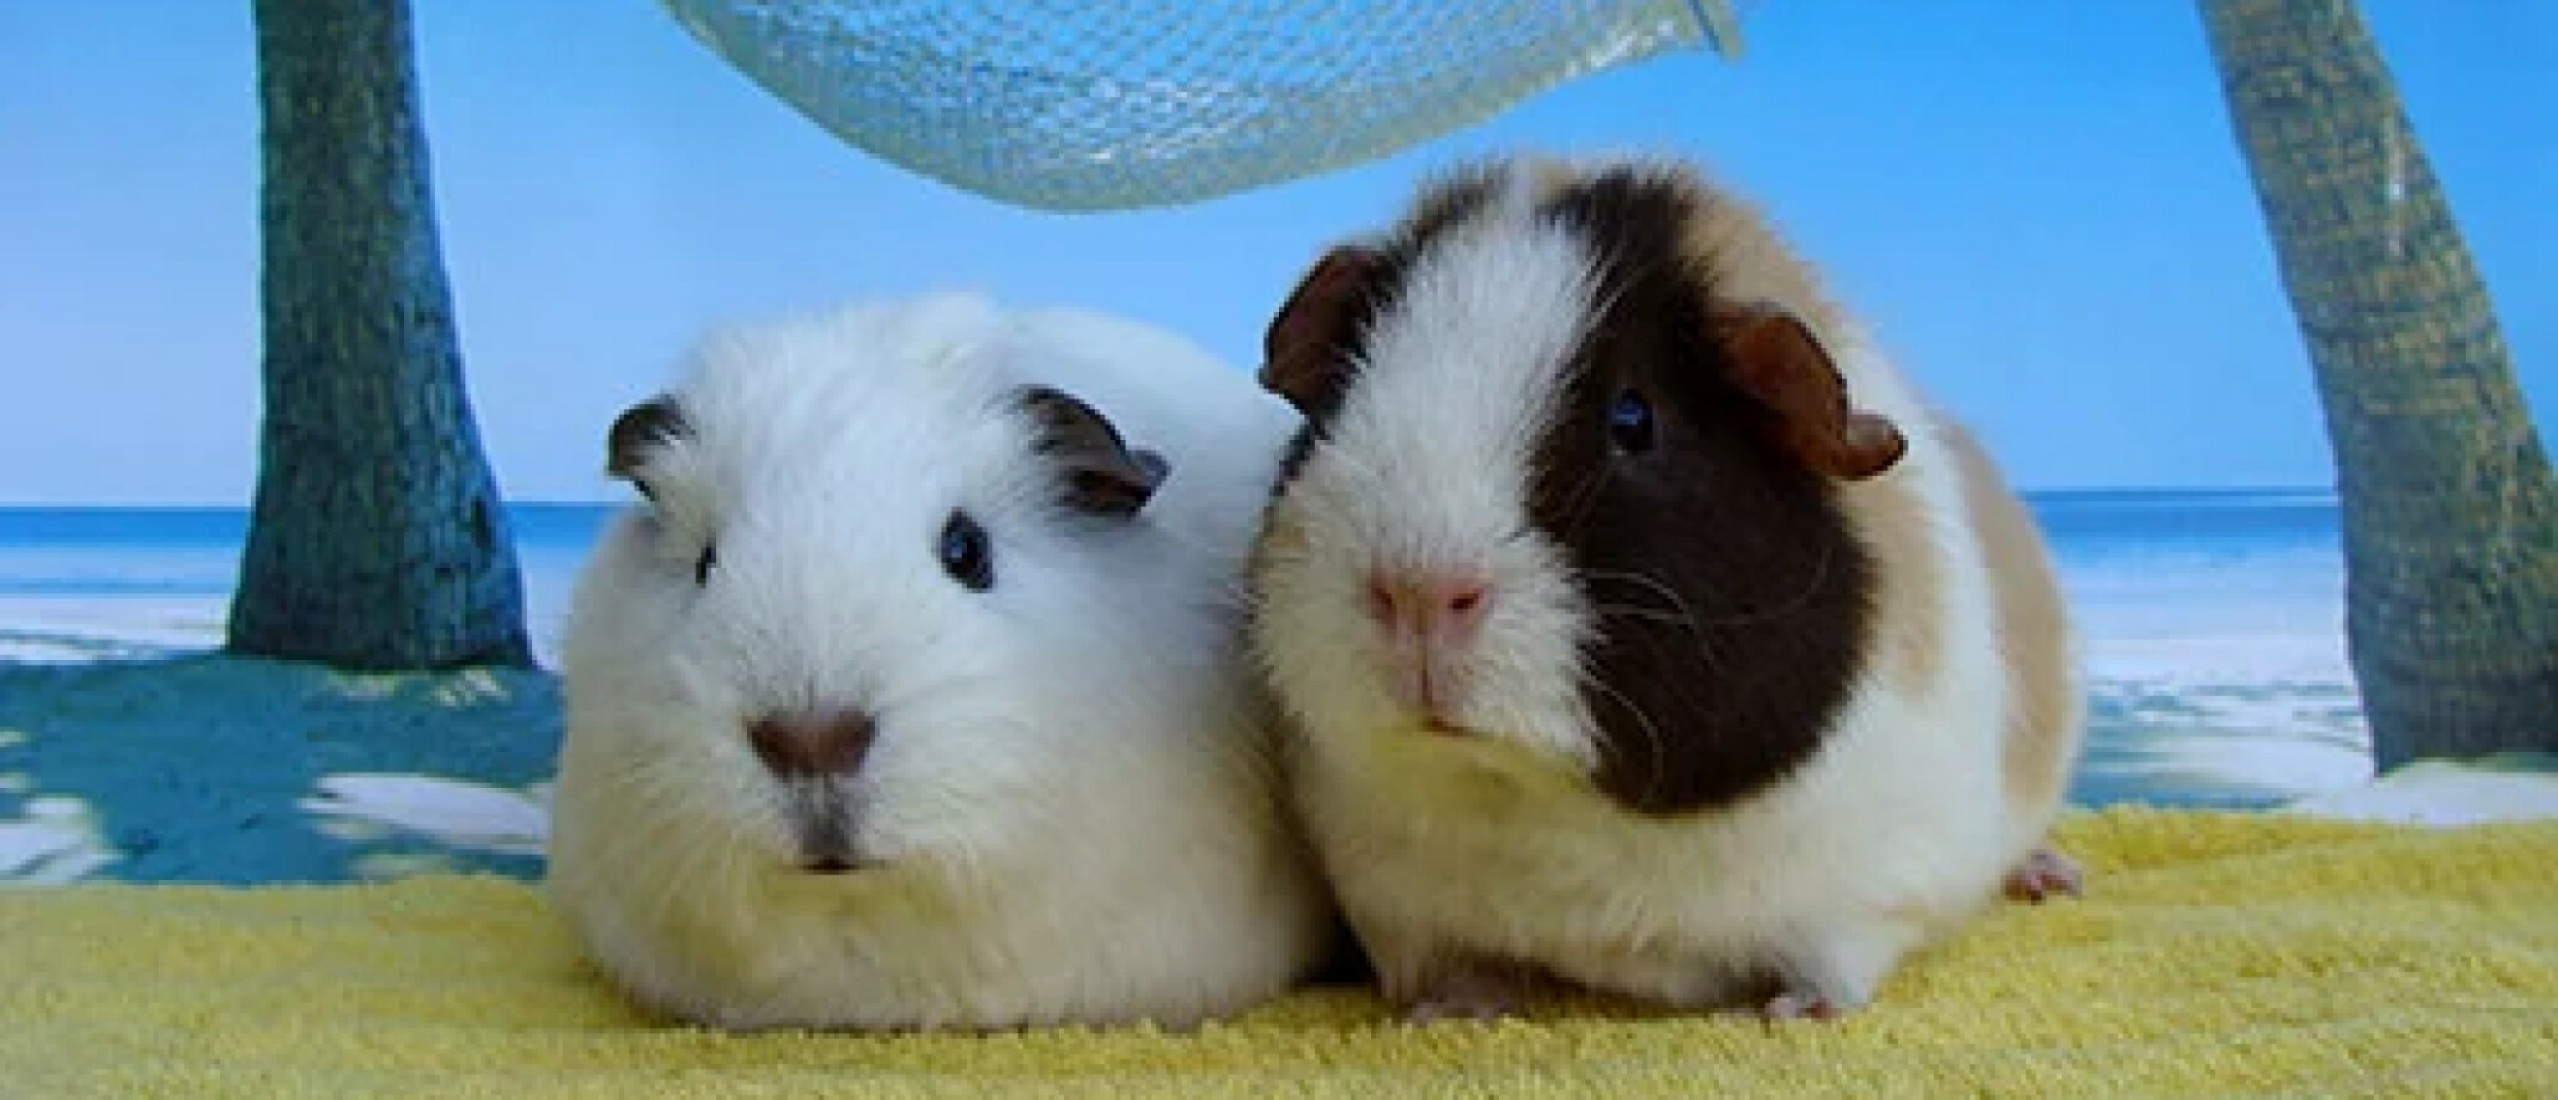 When is it too hot for guinea pigs? And what can I do to cool my guinea pig down?